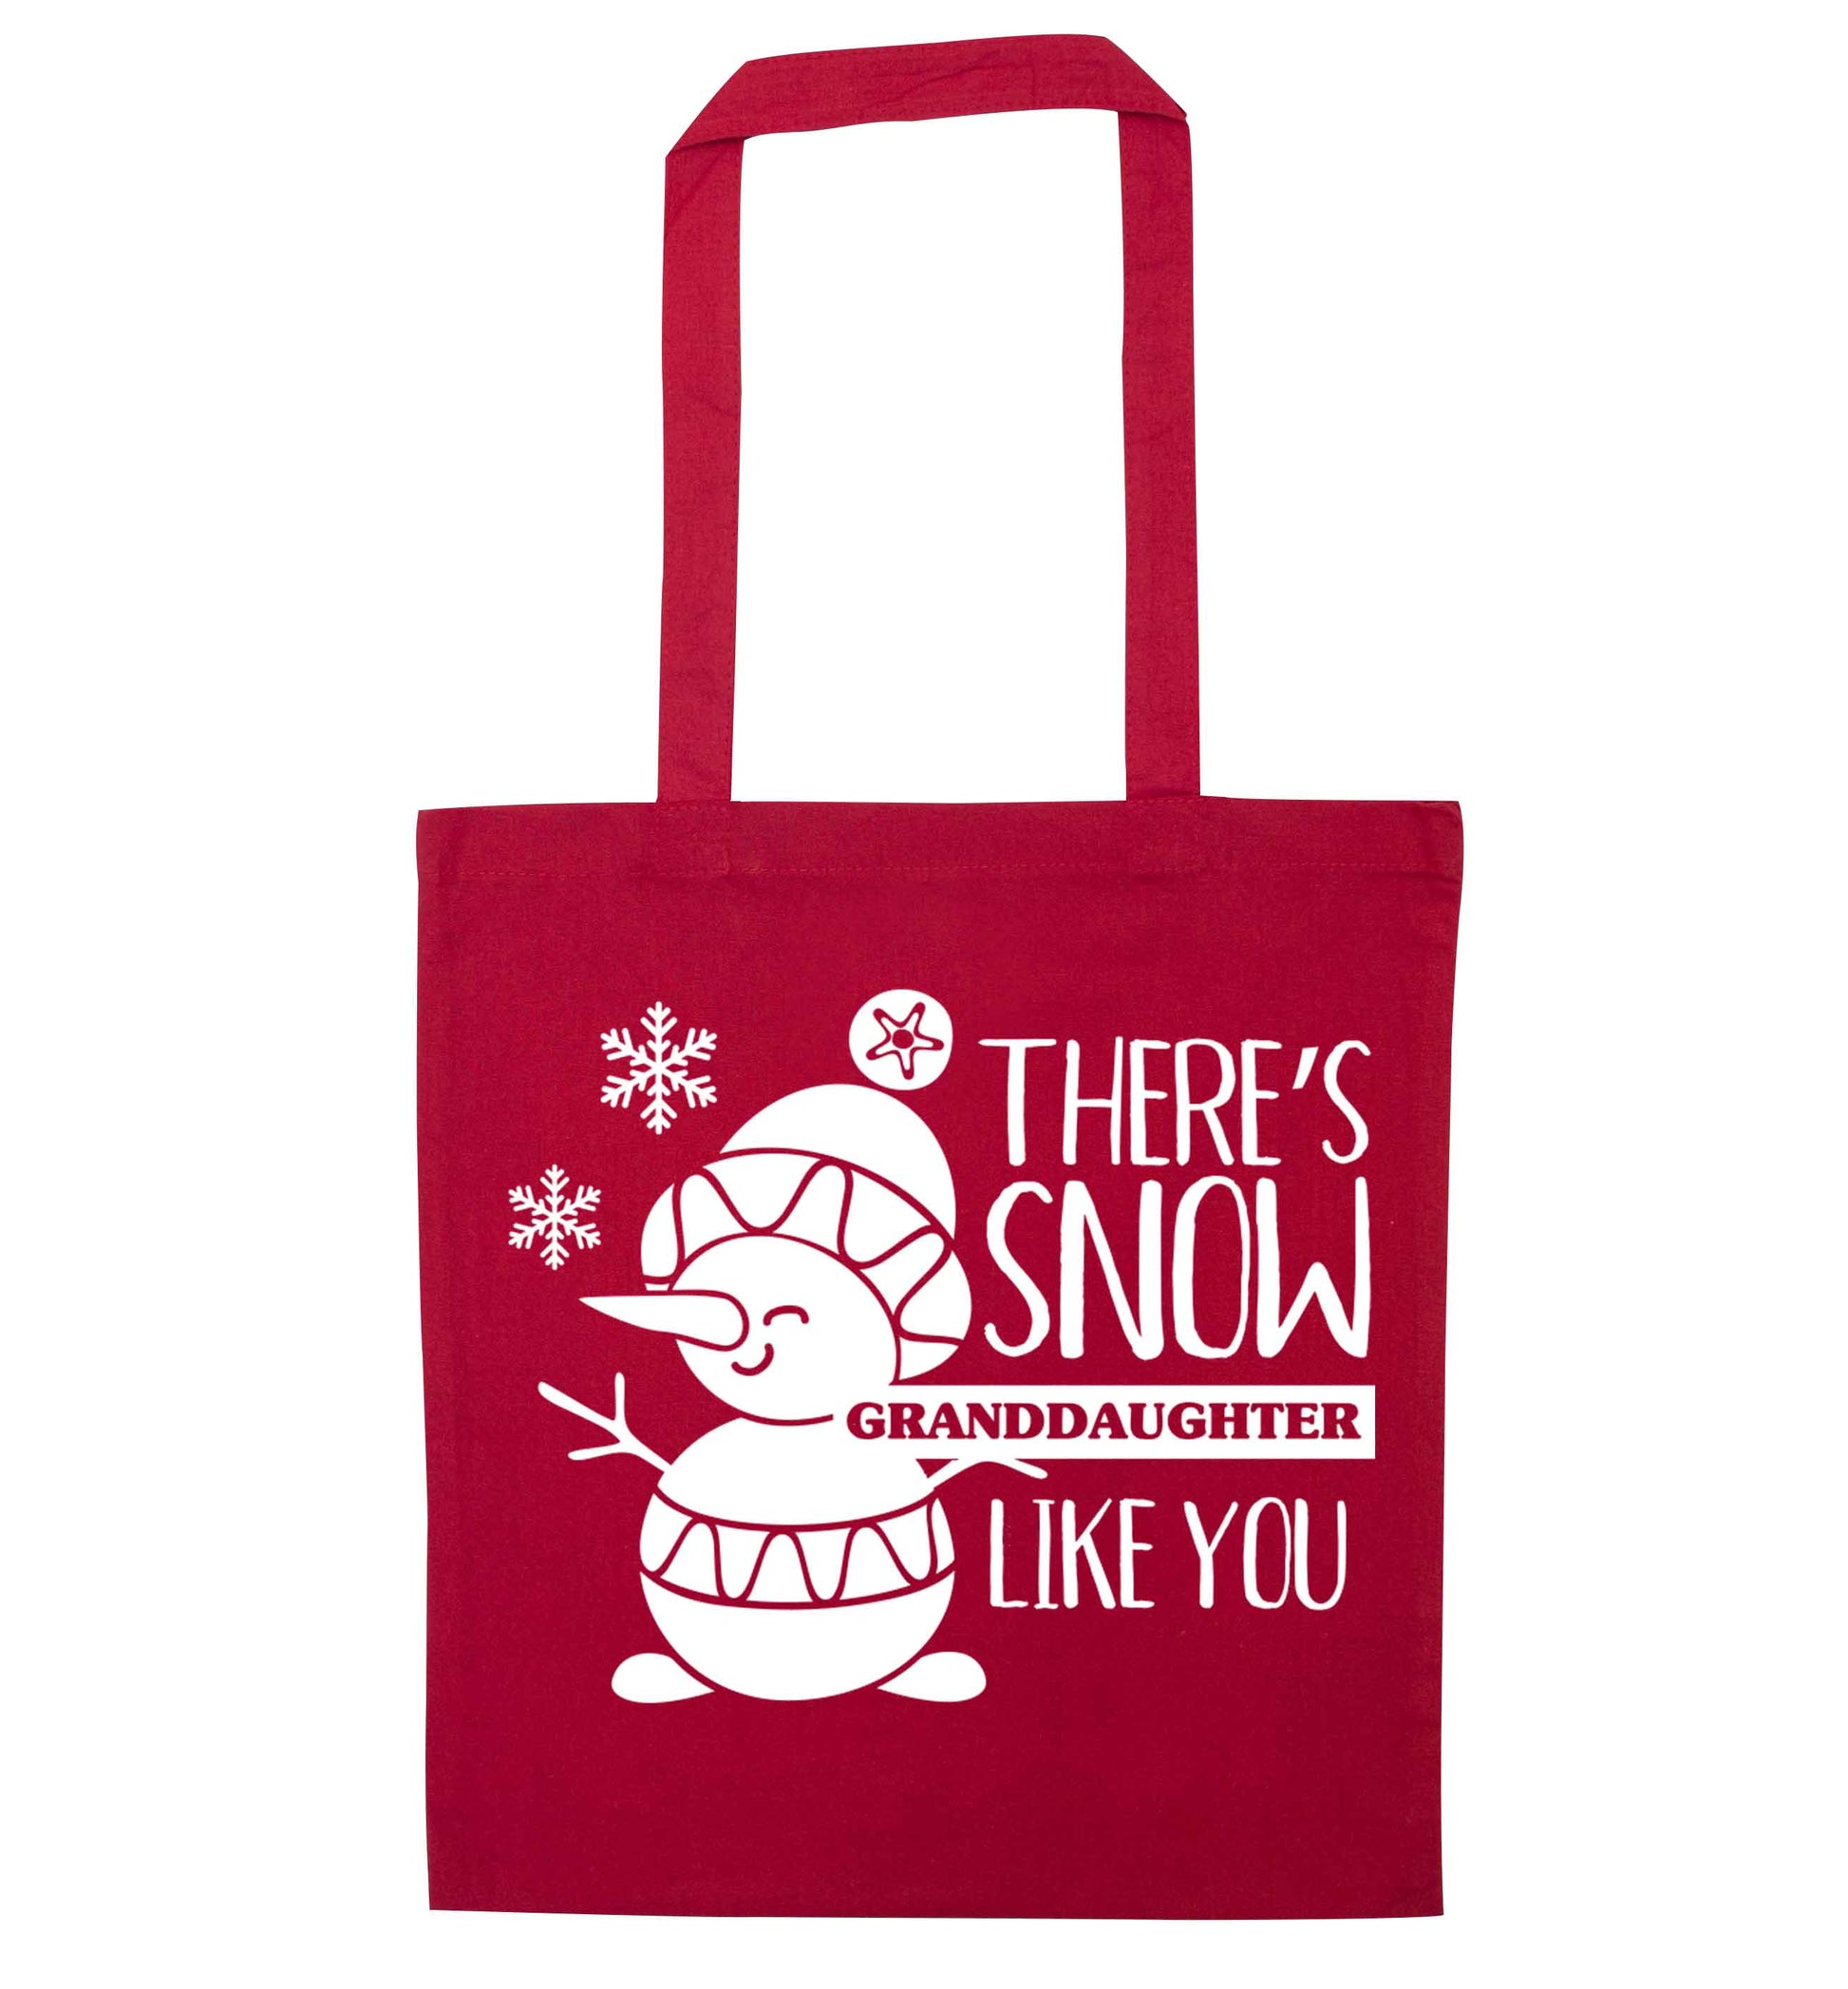 There's snow granddaughter like you red tote bag